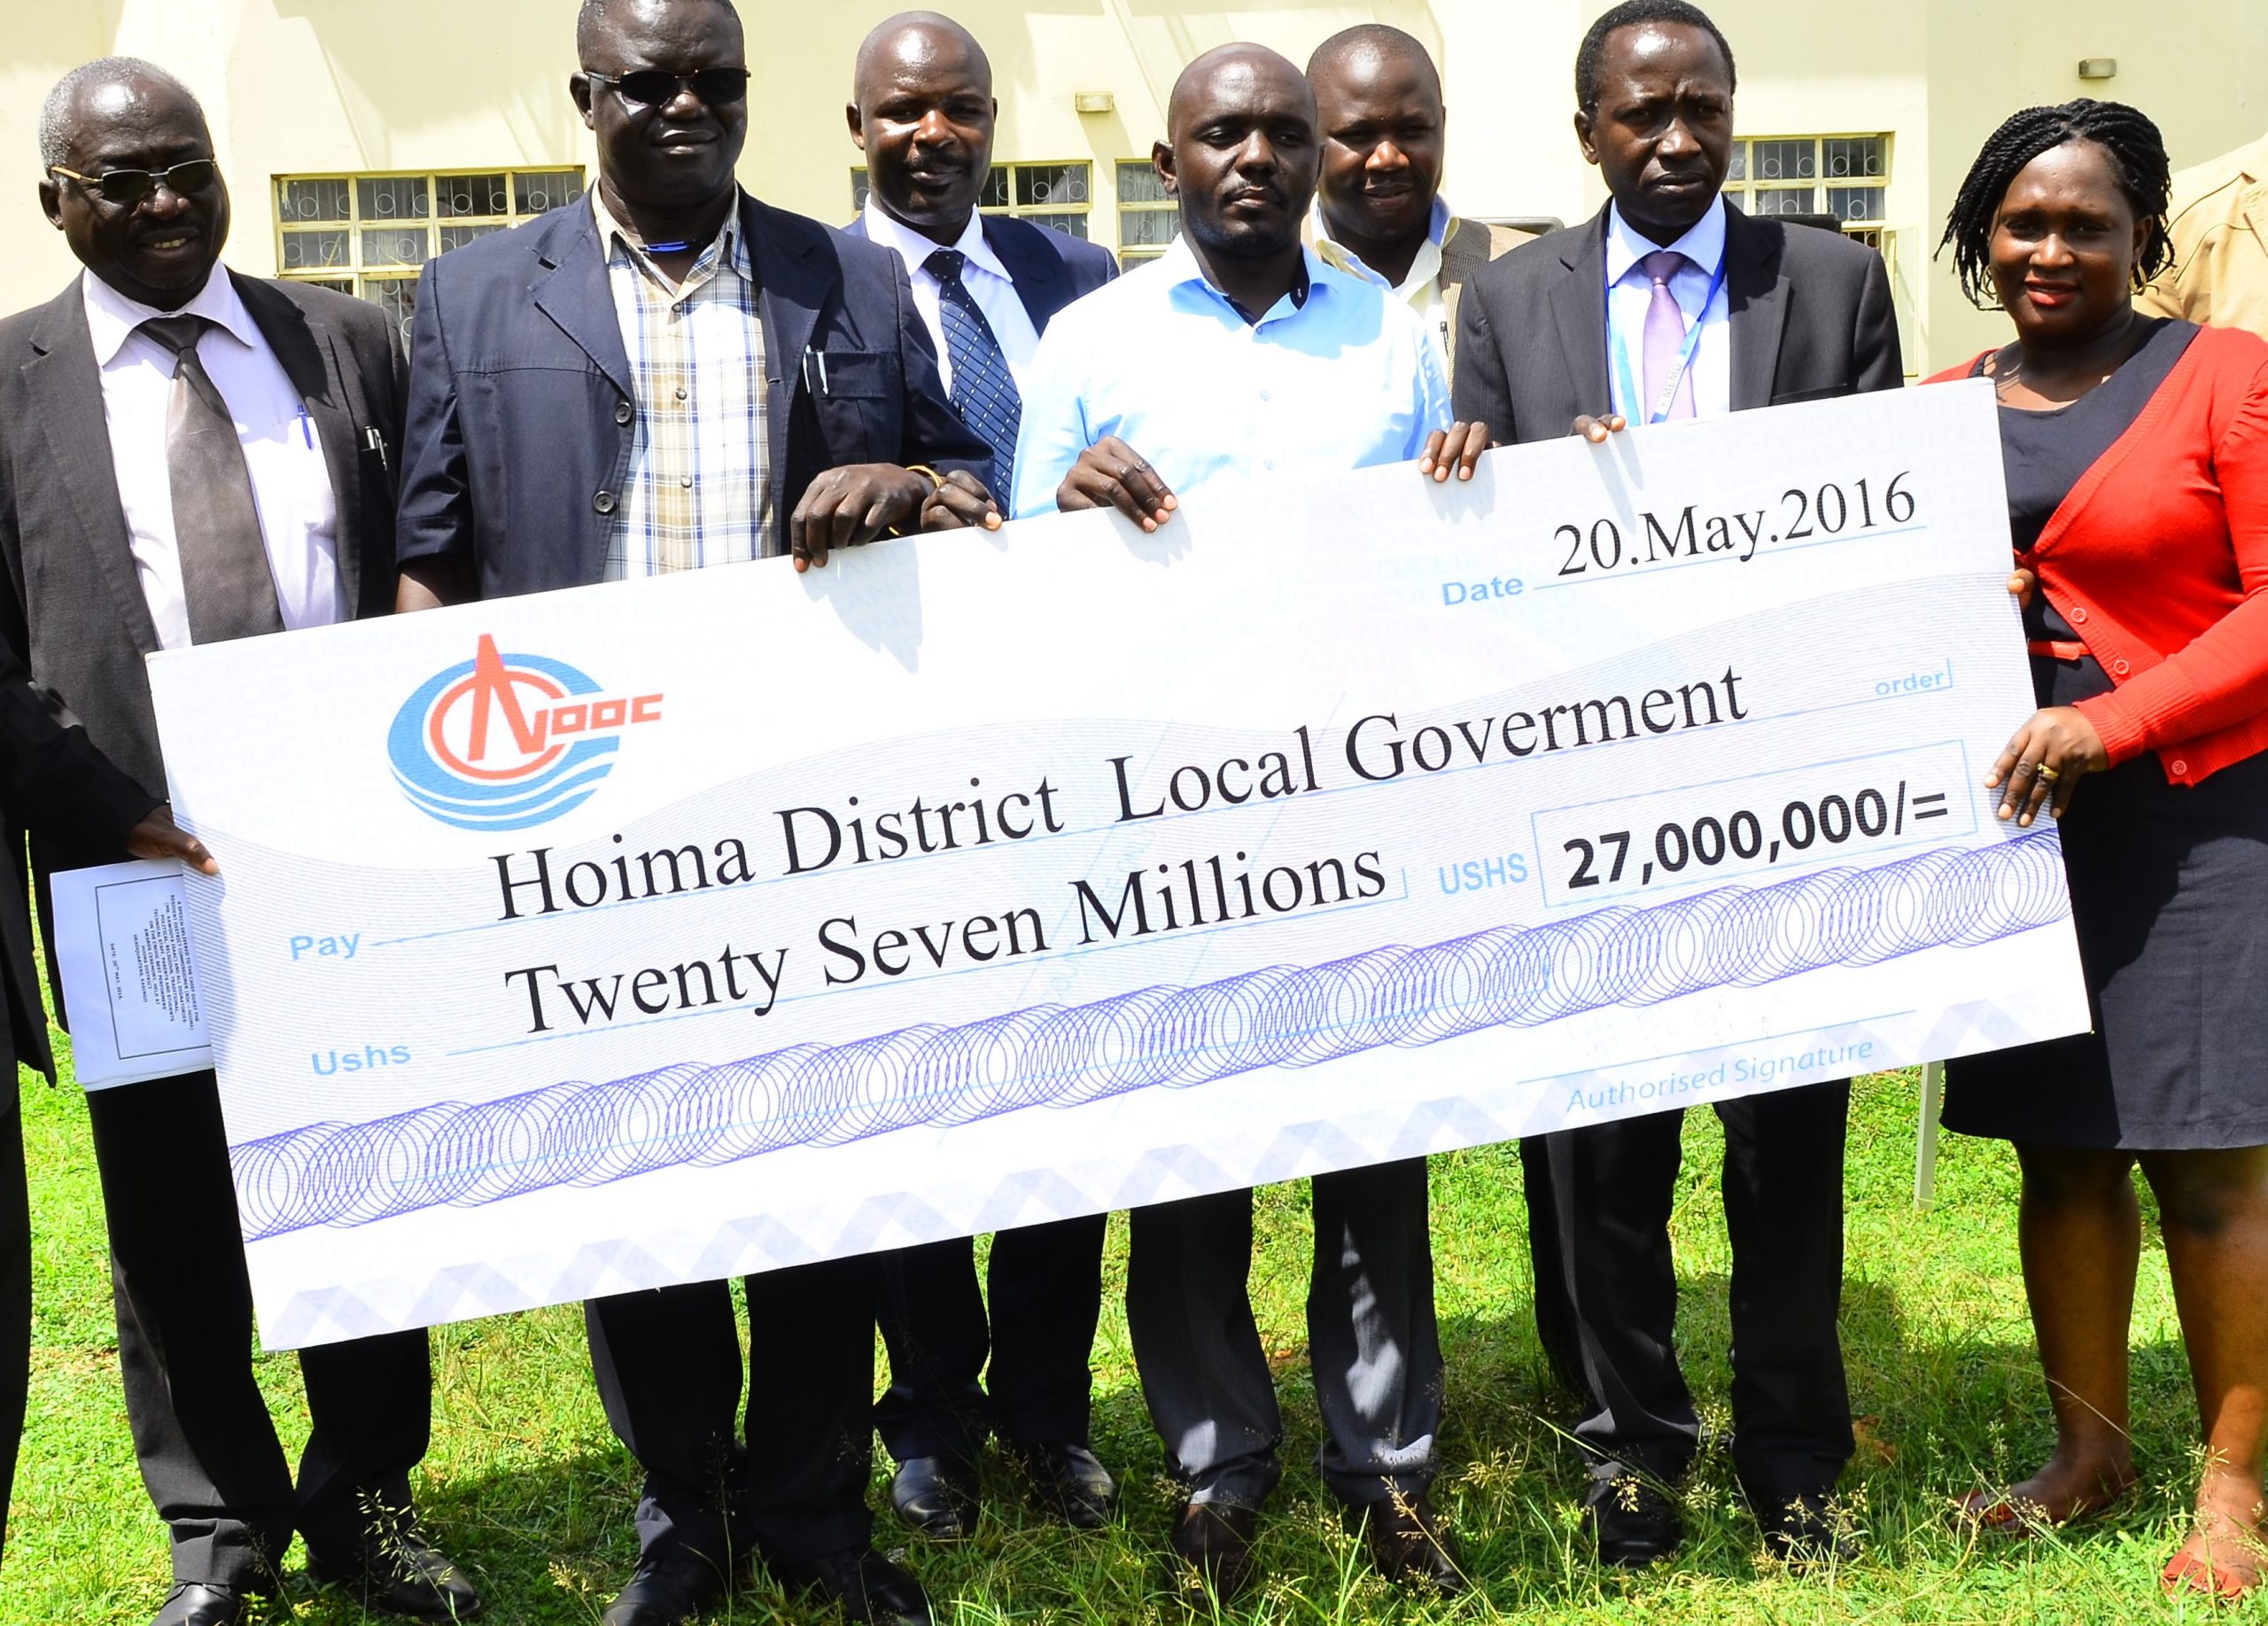 The MP of  Hoima district Mr. Rowlence Bategeka, Chief Administrative Officer, Mr. Luke Lukuda, Deputy RDC , Mr. Ambrose Mwesigye, acting Commissioner Geo-physics at the Ministry of Energy, Mr. Honey Mallinga receiving a dummy cheque of Shs 27million from Zakaria Lubega, David Byaruhanga and Aminah Bukenya, the representatives of CNOOC Uganda from the Corporate Affairs Office . CNOOC recognized and rewarded the best 90 students in Hoima district, who excelled at last year’s PLE, UCE and UACE level exams, on May 20th 2016.